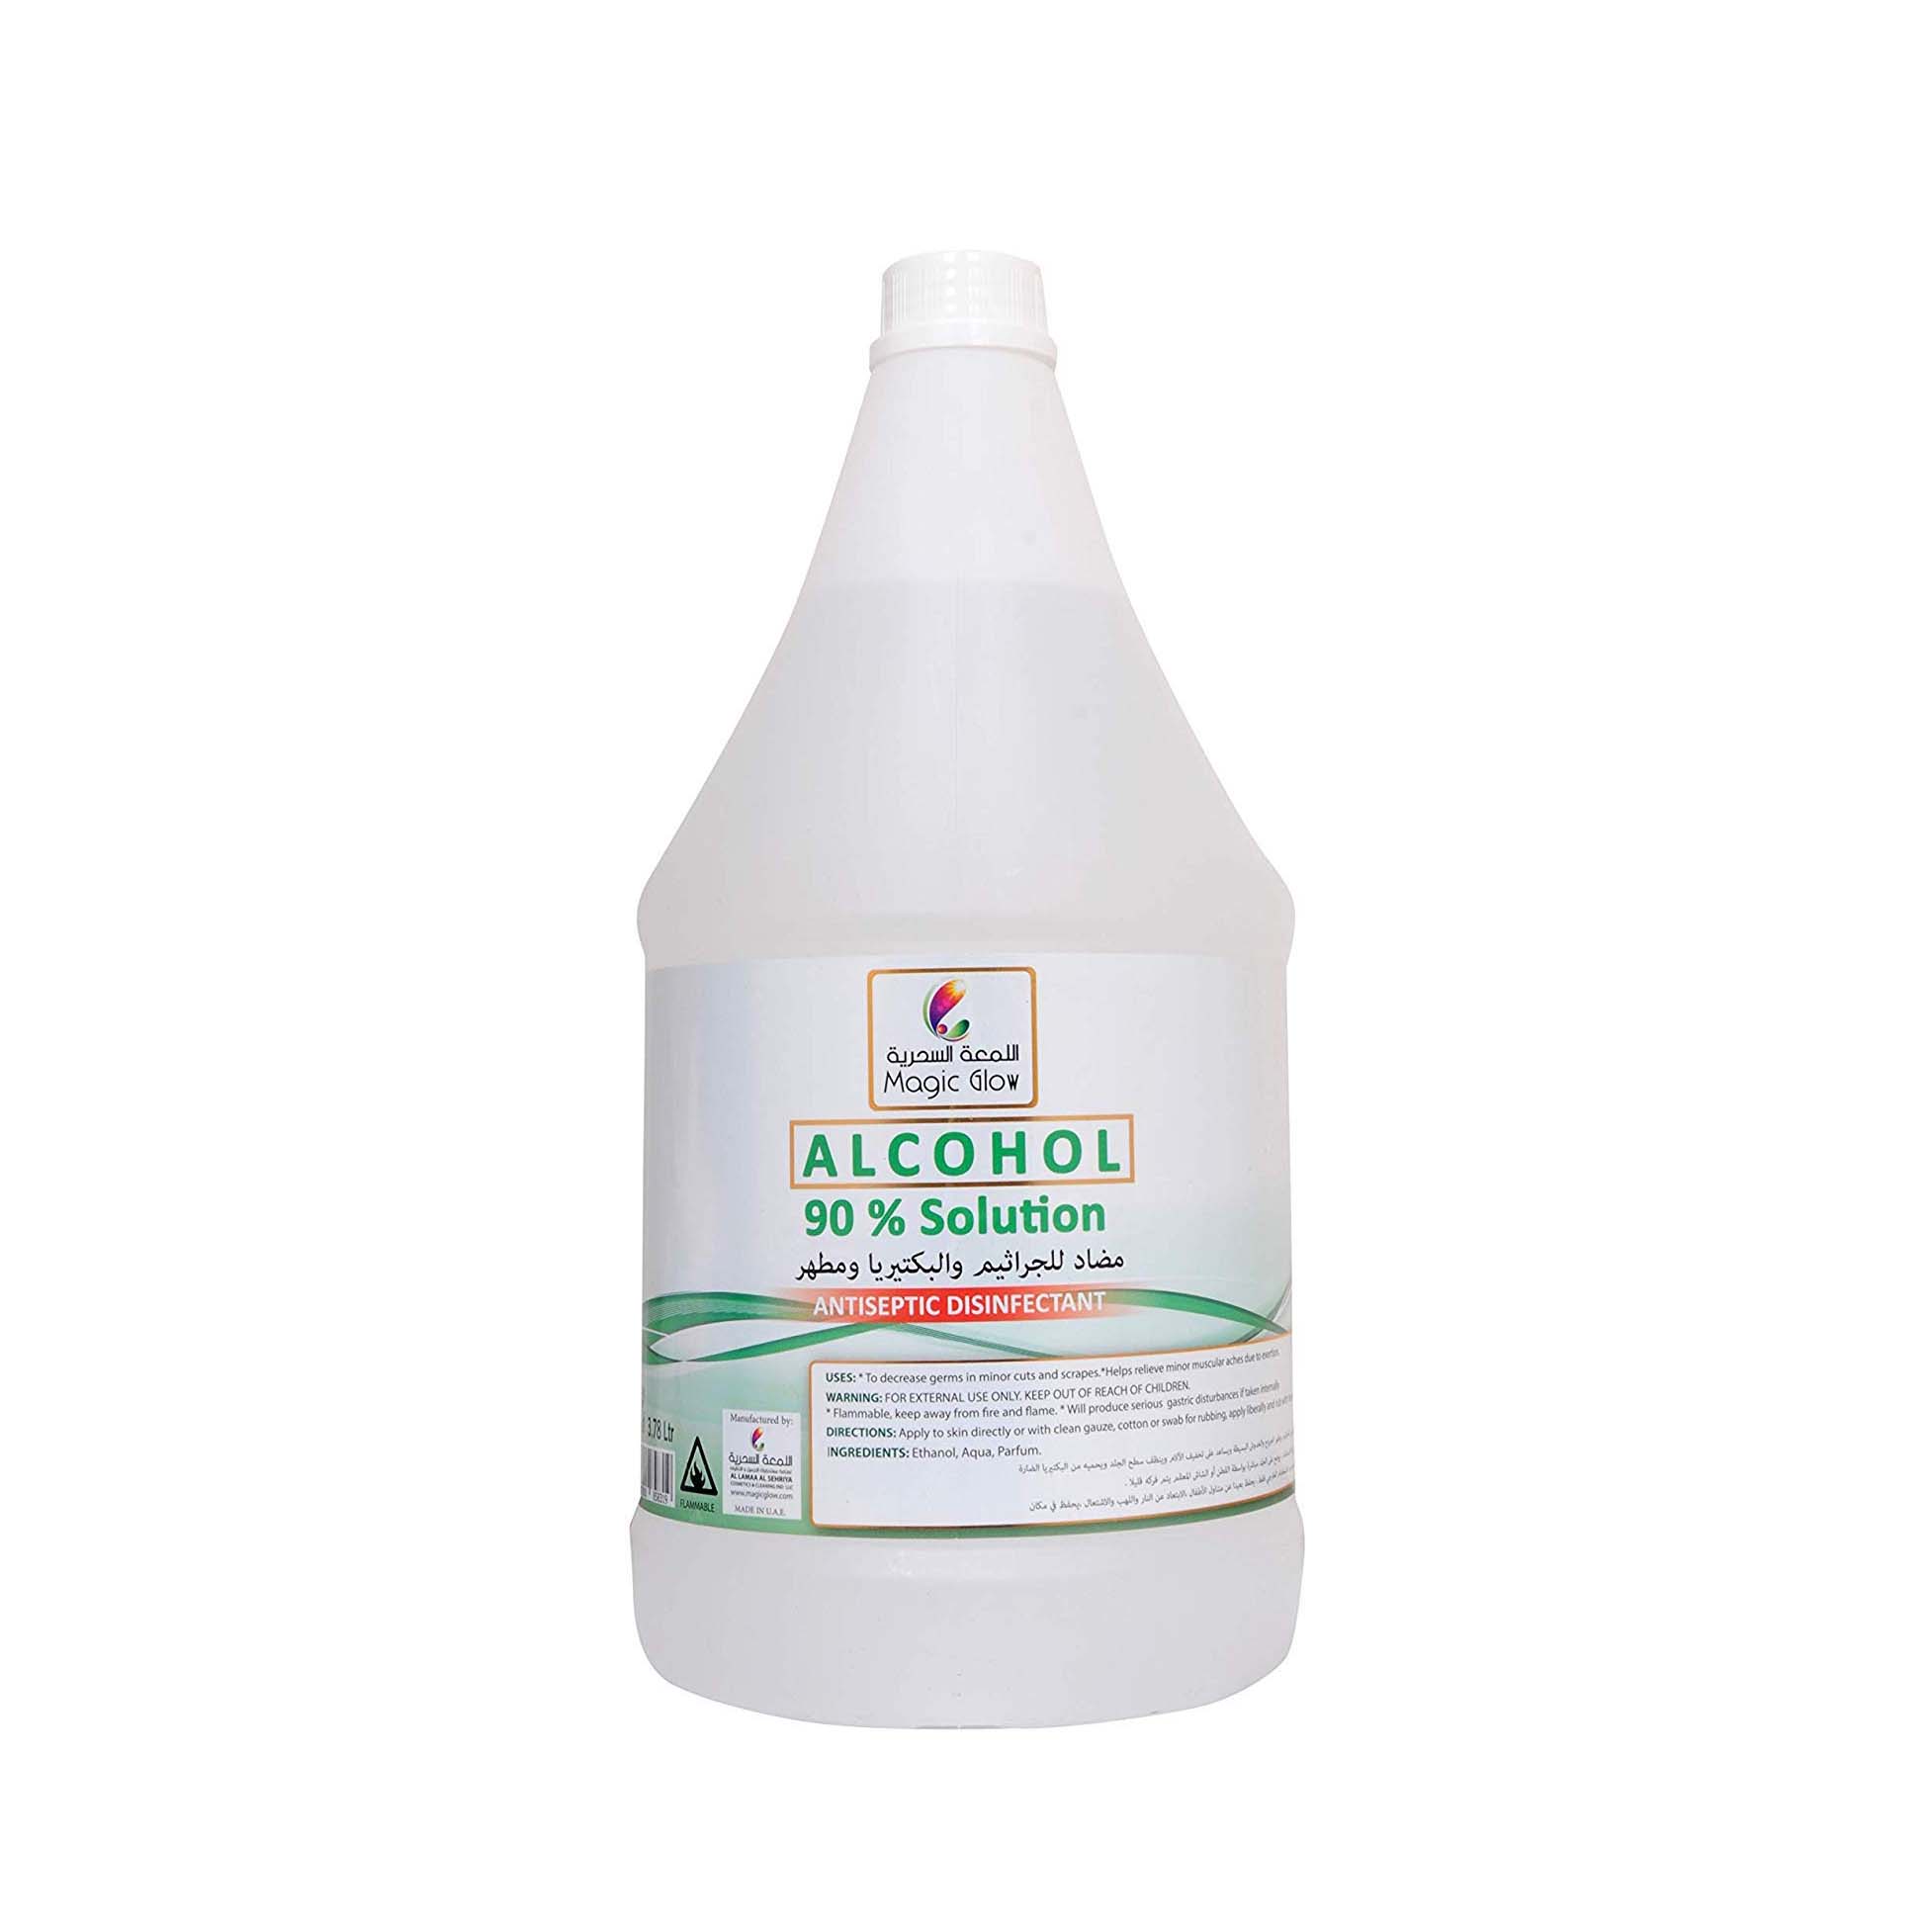 90% Ethanol Disinfectant Solution for sale across Sharjah, Abu Dhabi, Ajman, Dubai and other Emirates in UAE